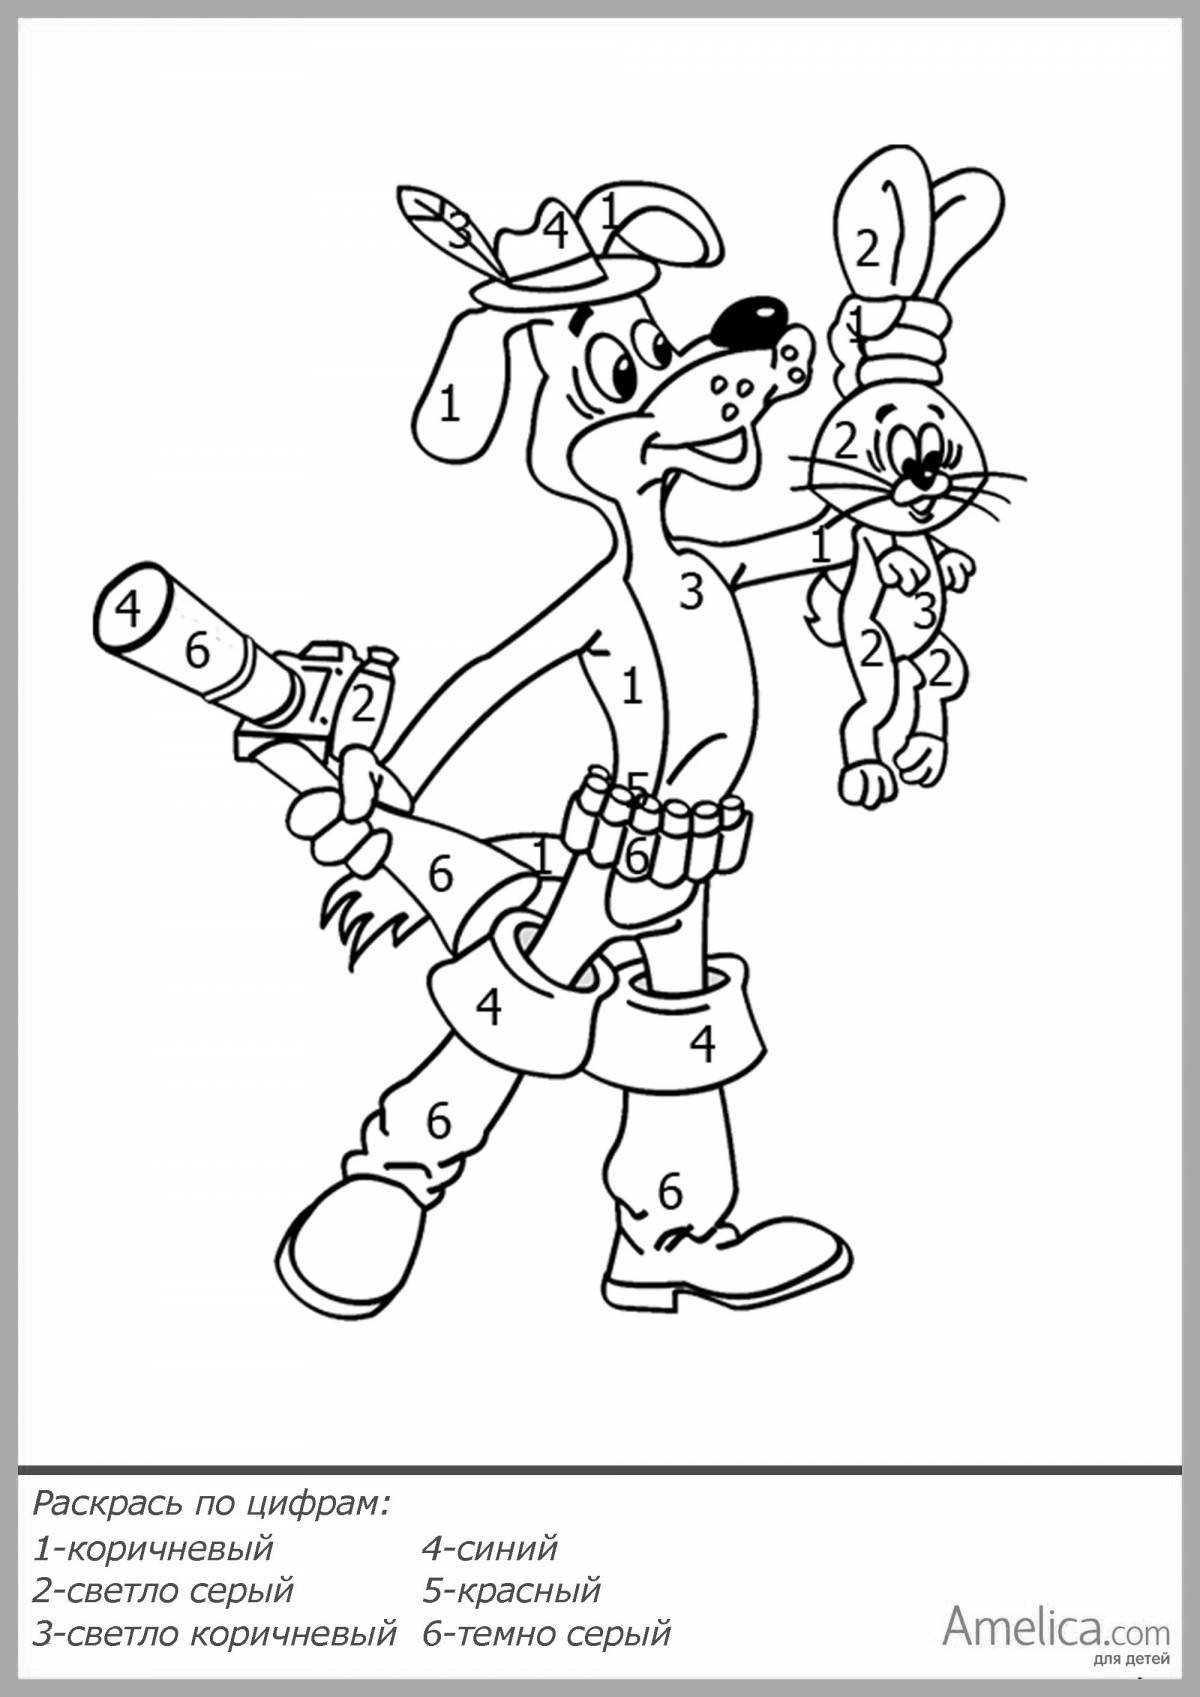 Playful buttermilk coloring page